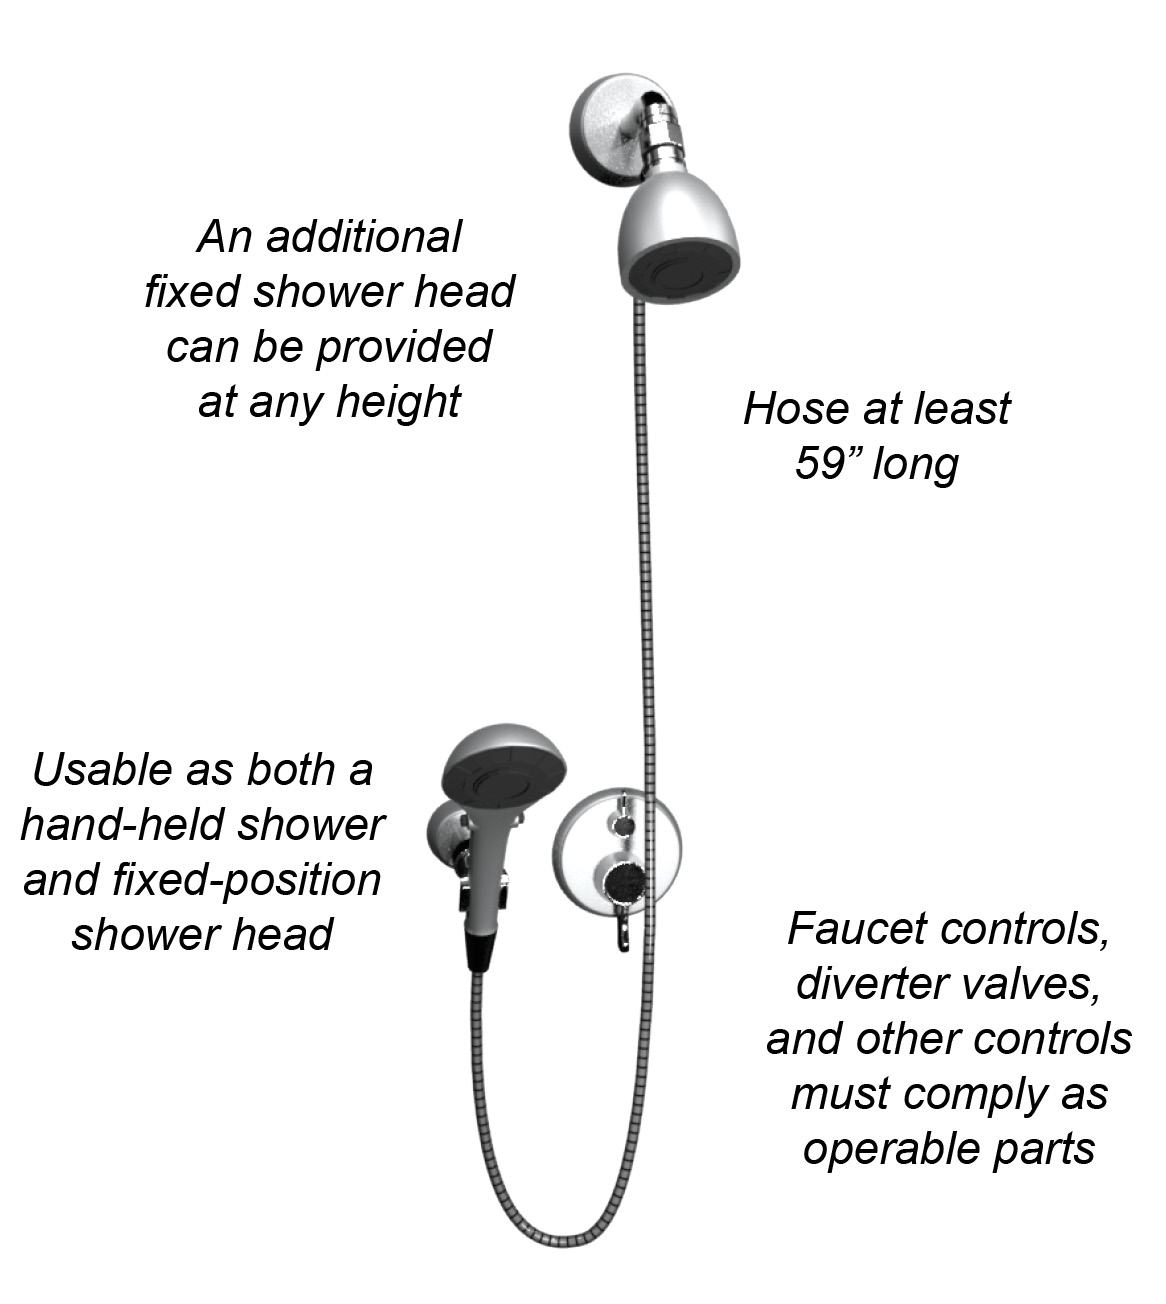 Fixed shower head with hand-held shower spray unit, controls, and diverter. Notes: An additional fixed shower head can be provided at any height. Hose at least 59 inches long. Usable as both a hand-held shower and fixed-position shower head. Faucet controls, diverter valves, and other controls must comply as operable parts.